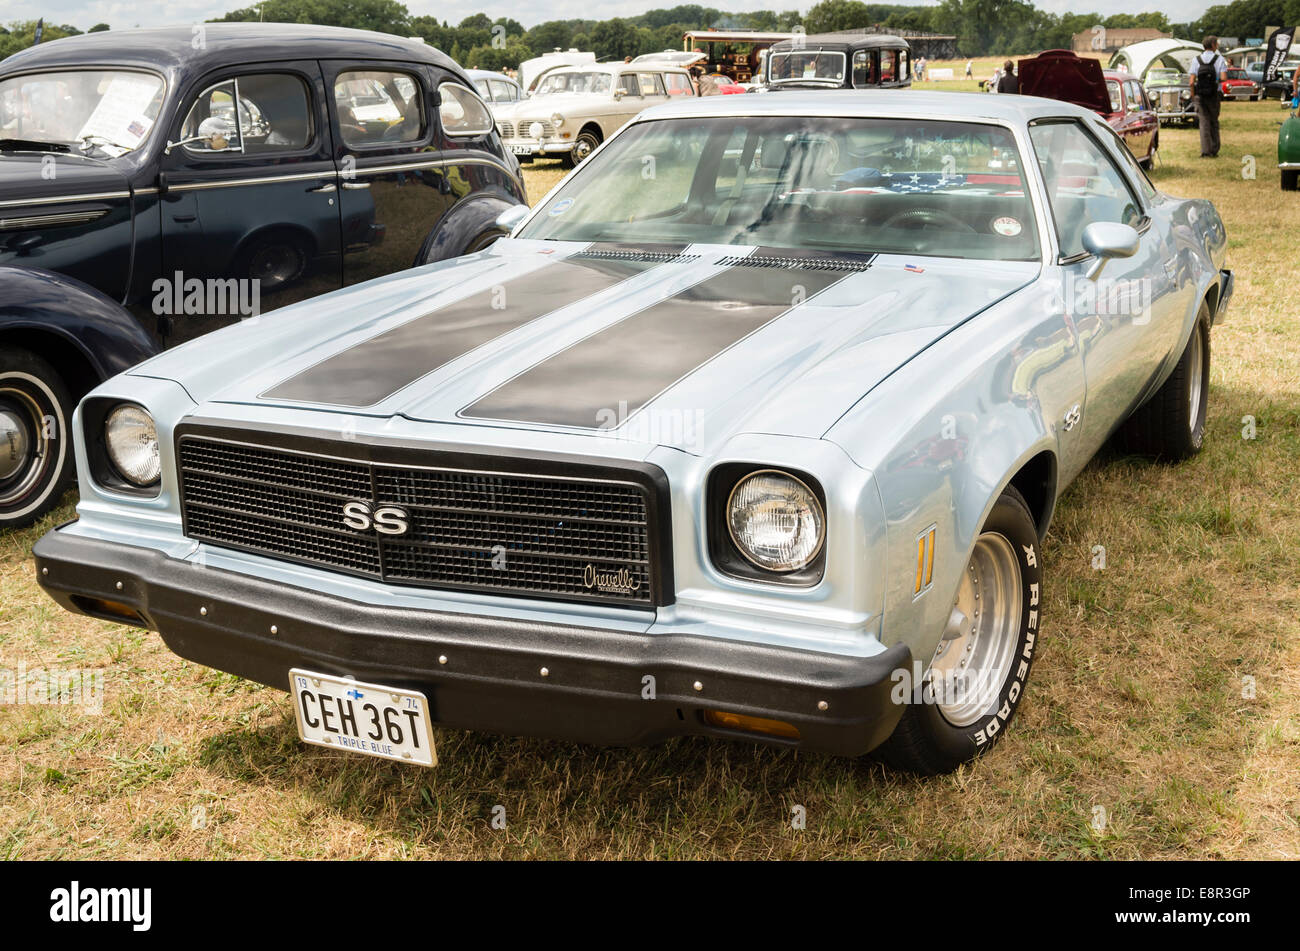 1970s Chevrolet Chevelle American car at an English show Stock Photo